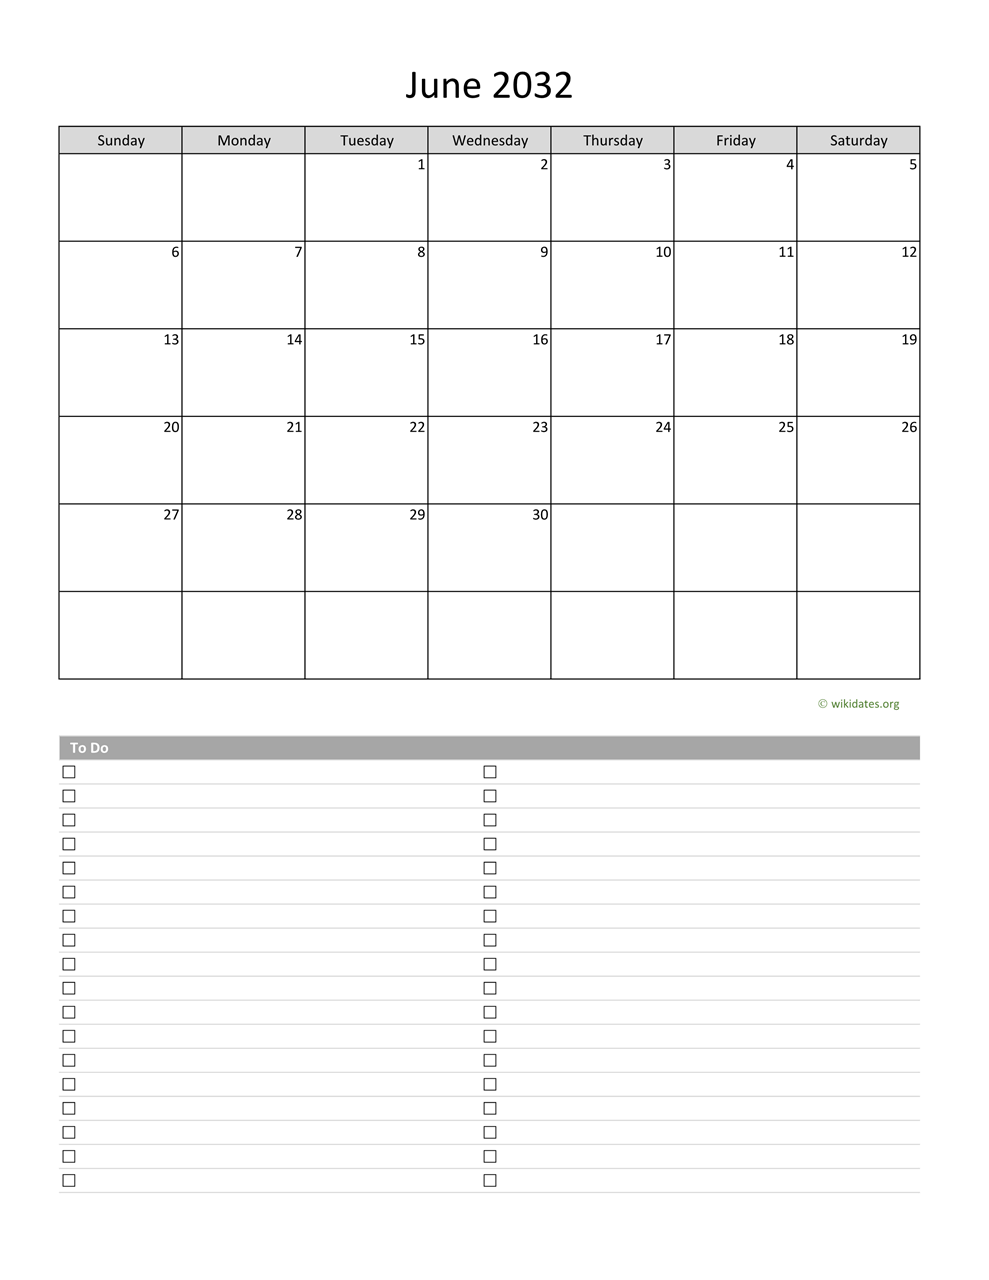 June 2032 Calendar with To Do List WikiDates org